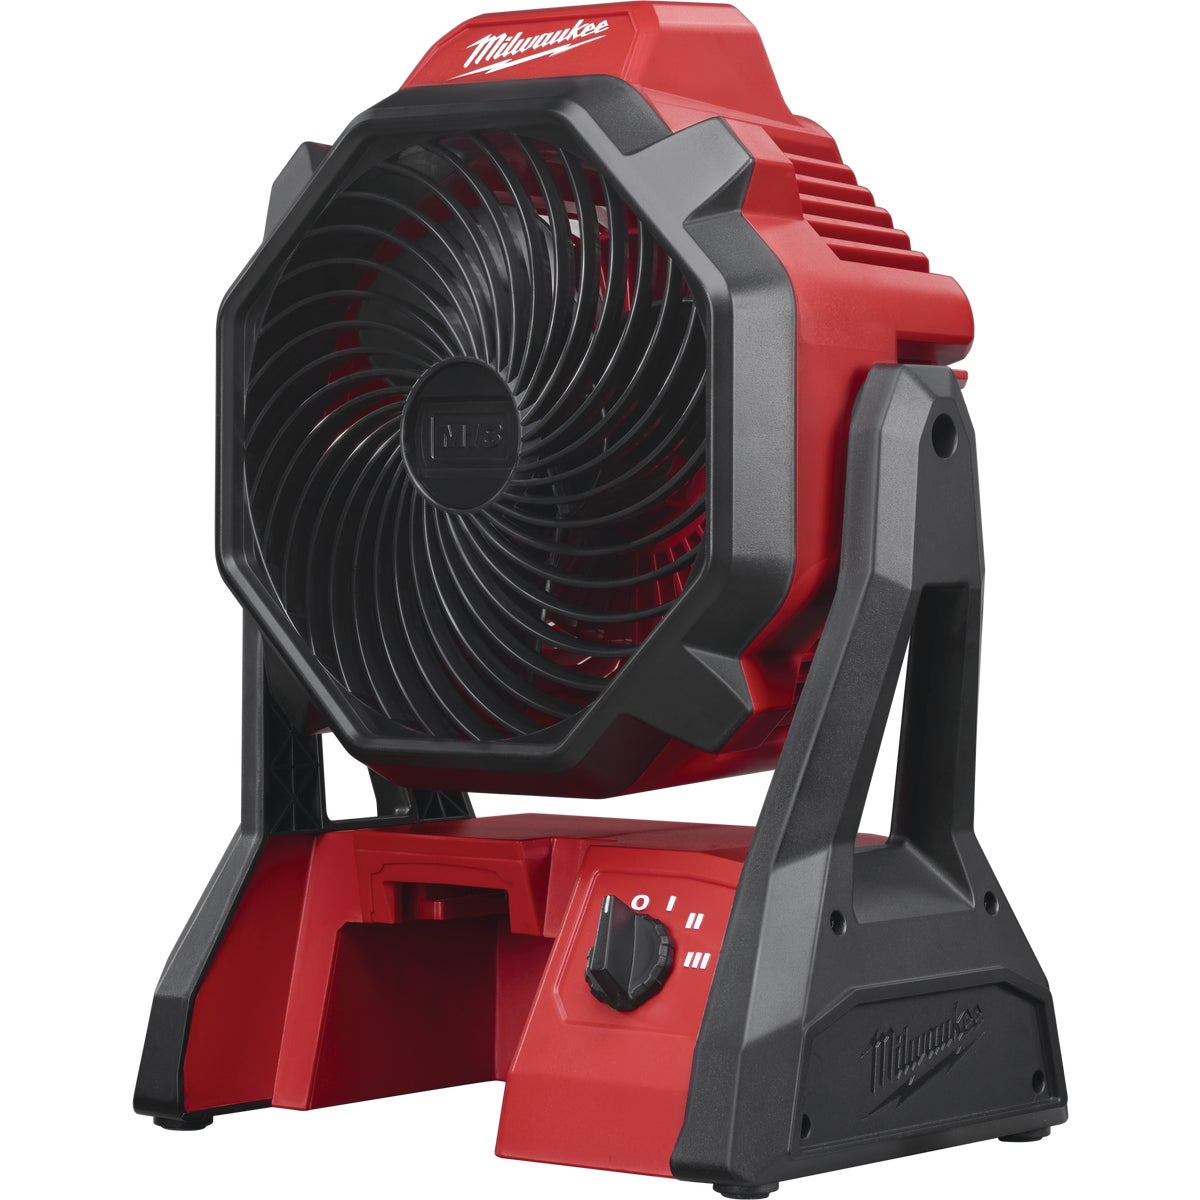 Item 347608, The M18 Jobsite Fan provides the most powerful airflow, and unmatched run-